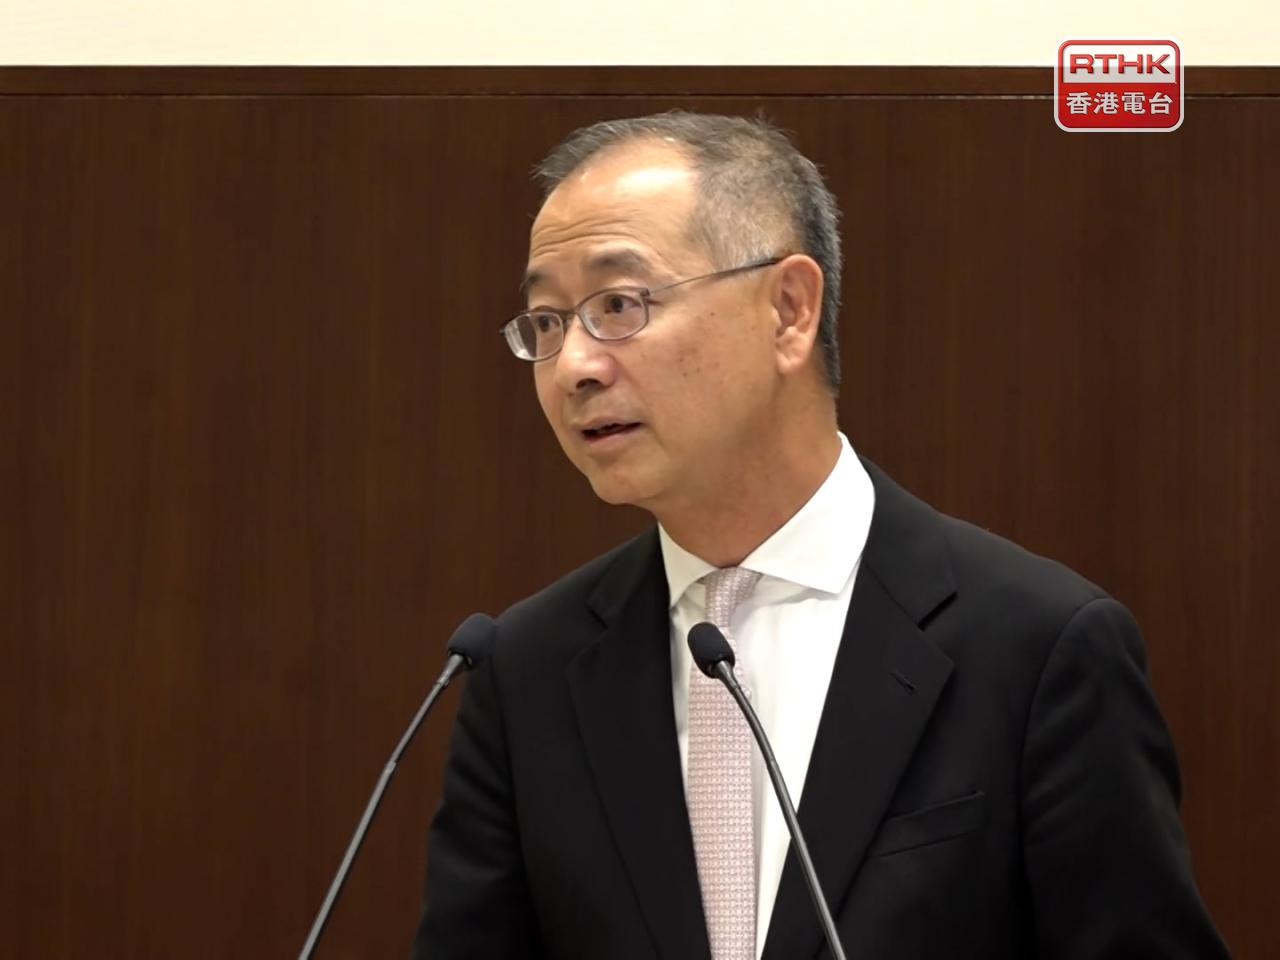 Eddie Yue reappointed as HKMA chief